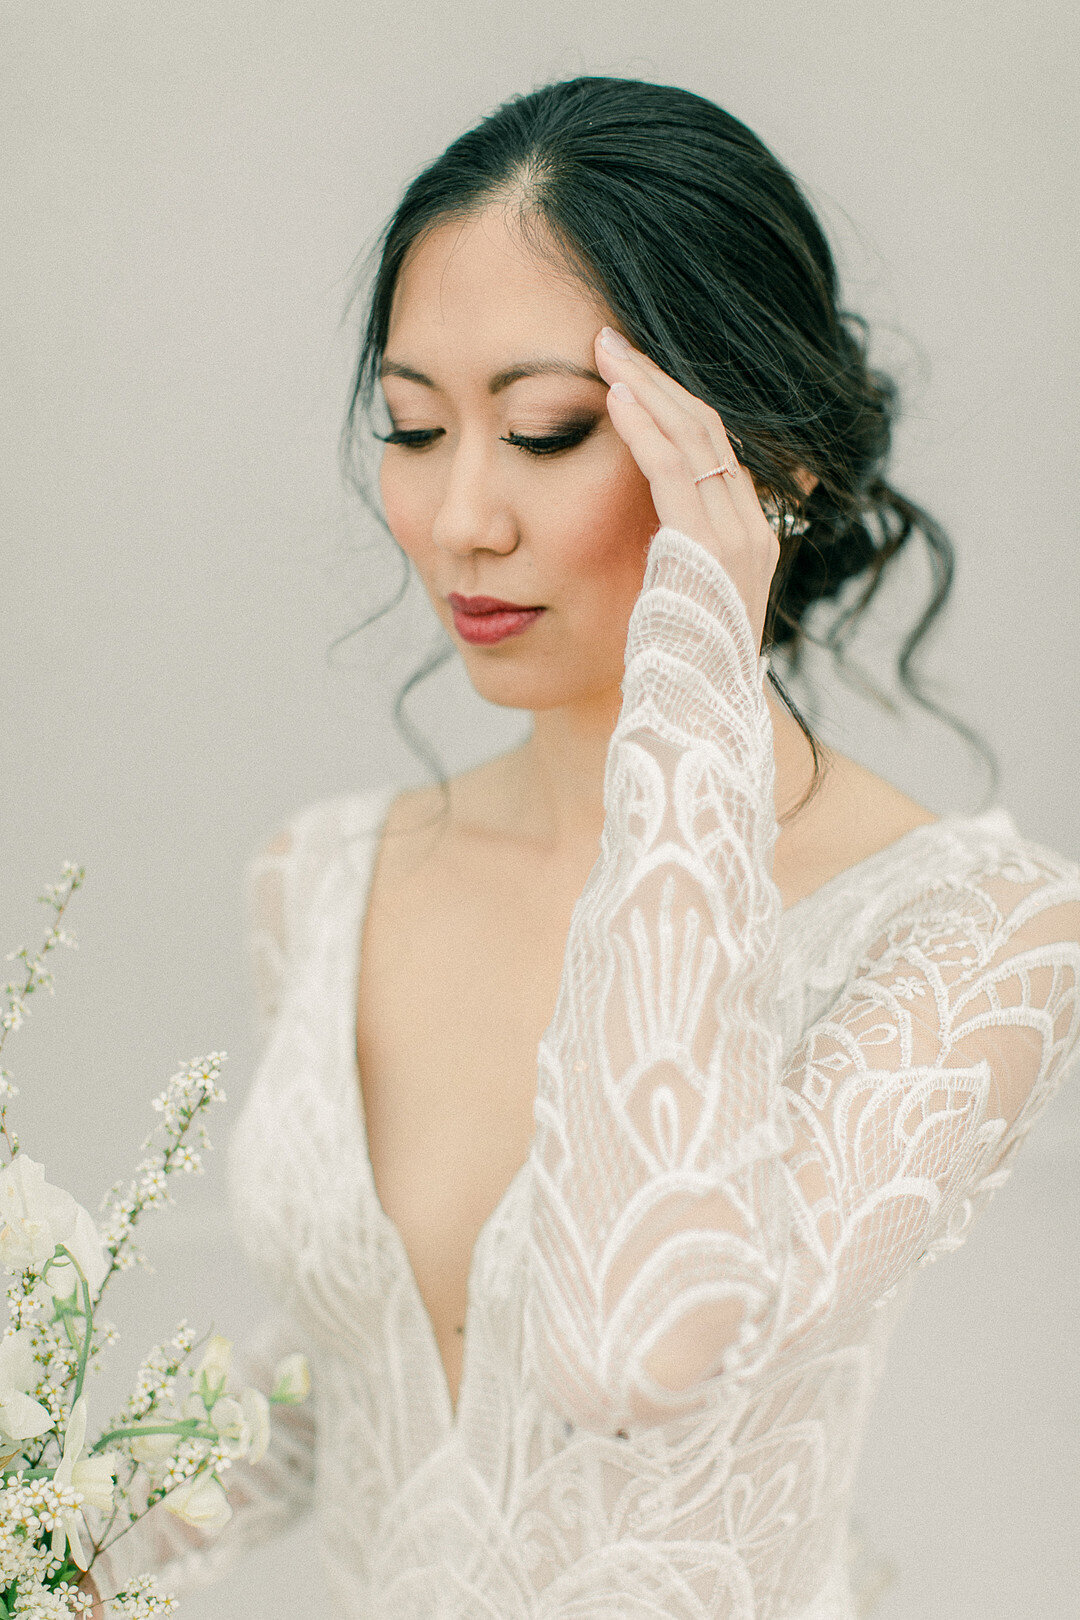 Spring has sprung in the Hudson Valley and this intimate wedding makes us want to lay in a field of_Krystal Balzer Photography _Publish -70_low